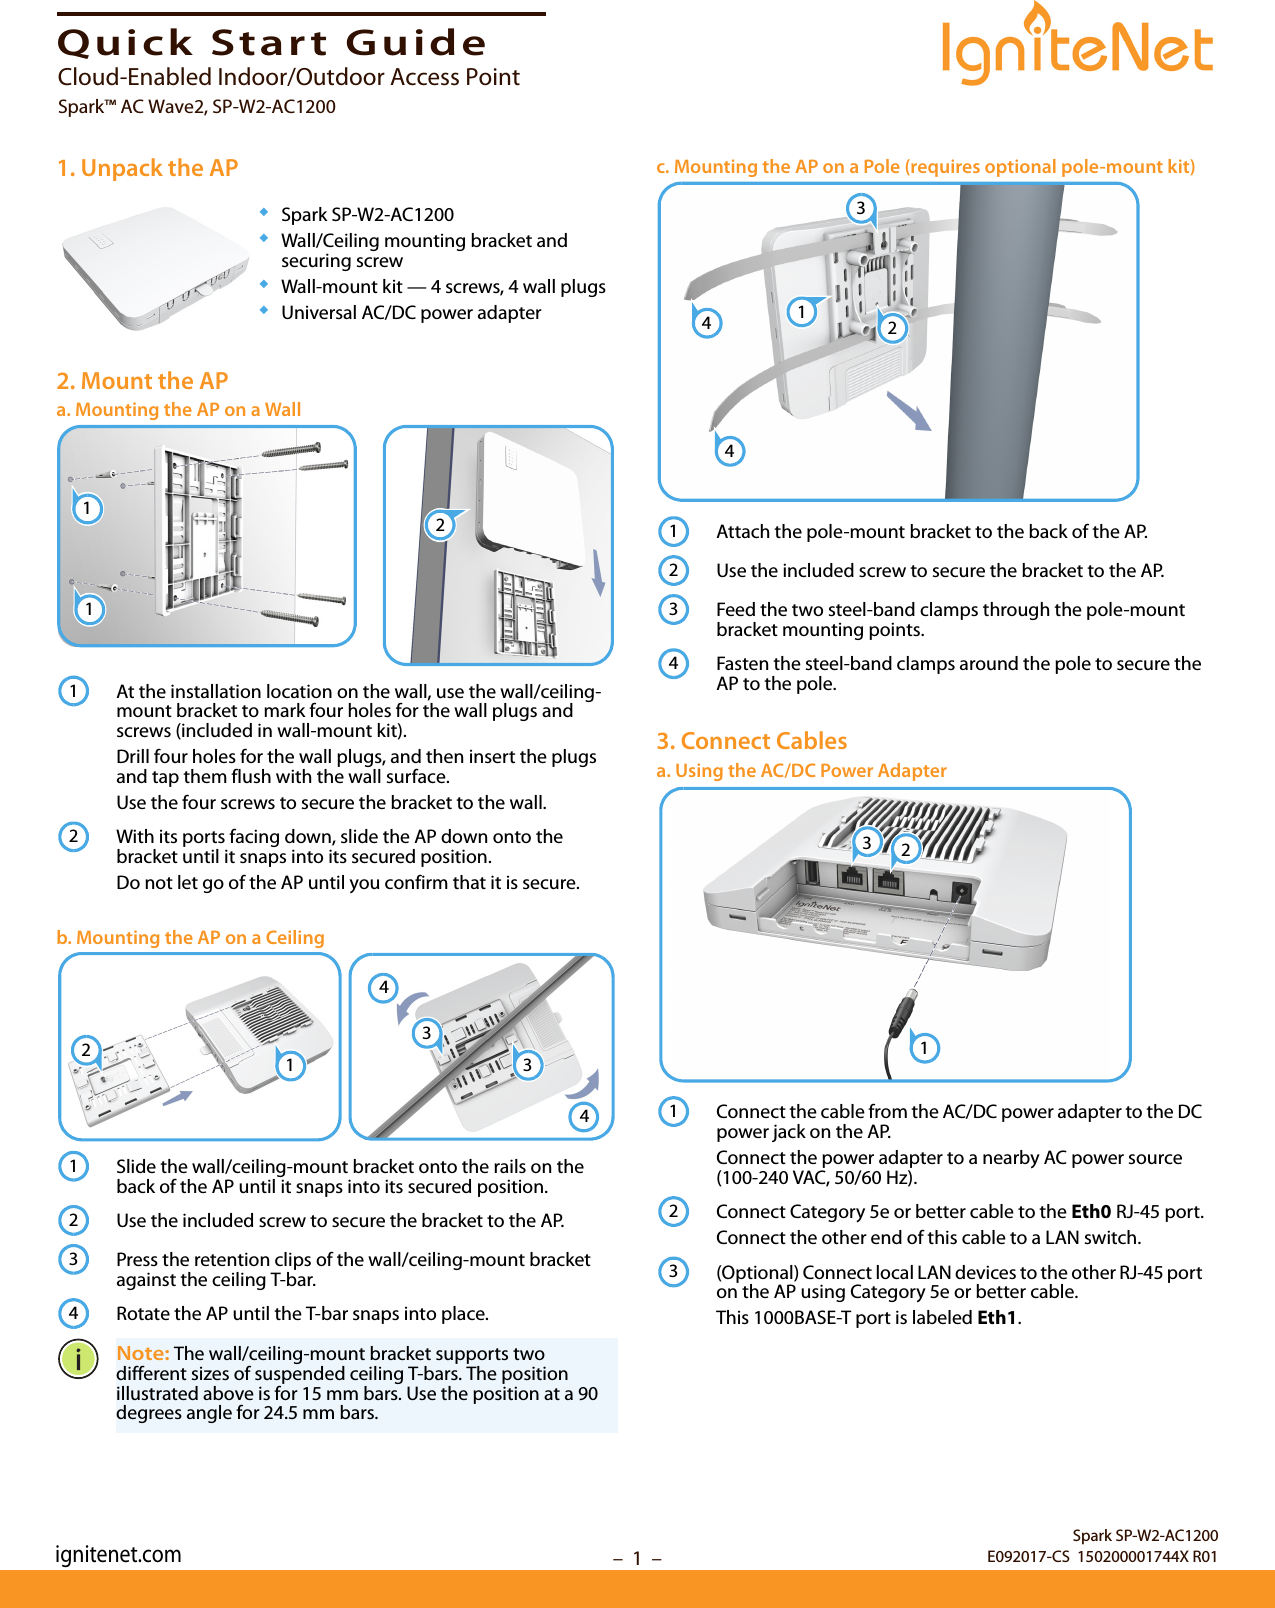 –  1  –Quick Start Guide1. Unpack the AP◆Spark SP-W2-AC1200◆Wall/Ceiling mounting bracket and securing screw◆Wall-mount kit — 4 screws, 4 wall plugs◆Universal AC/DC power adapter2. Mount the APa. Mounting the AP on a WallAt the installation location on the wall, use the wall/ceiling-mount bracket to mark four holes for the wall plugs and screws (included in wall-mount kit).Drill four holes for the wall plugs, and then insert the plugs and tap them flush with the wall surface. Use the four screws to secure the bracket to the wall.With its ports facing down, slide the AP down onto the bracket until it snaps into its secured position.Do not let go of the AP until you confirm that it is secure.b. Mounting the AP on a CeilingSlide the wall/ceiling-mount bracket onto the rails on the back of the AP until it snaps into its secured position.Use the included screw to secure the bracket to the AP.Press the retention clips of the wall/ceiling-mount bracket against the ceiling T-bar.Rotate the AP until the T-bar snaps into place.Note: The wall/ceiling-mount bracket supports two different sizes of suspended ceiling T-bars. The position illustrated above is for 15 mm bars. Use the position at a 90 degrees angle for 24.5 mm bars.112123344211234c. Mounting the AP on a Pole (requires optional pole-mount kit)Attach the pole-mount bracket to the back of the AP. Use the included screw to secure the bracket to the AP.Feed the two steel-band clamps through the pole-mount bracket mounting points.Fasten the steel-band clamps around the pole to secure the AP to the pole.3. Connect Cablesa. Using the AC/DC Power AdapterConnect the cable from the AC/DC power adapter to the DC power jack on the AP.Connect the power adapter to a nearby AC power source (100-240 VAC, 50/60 Hz).Connect Category 5e or better cable to the Eth0 RJ-45 port.Connect the other end of this cable to a LAN switch.(Optional) Connect local LAN devices to the other RJ-45 port on the AP using Category 5e or better cable.This 1000BASE-T port is labeled Eth1.132441234231123Spark SP-W2-AC1200E092017-CS  150200001744X R01Cloud-Enabled Indoor/Outdoor Access PointSpark™ AC Wave2, SP-W2-AC1200ignitenet.com